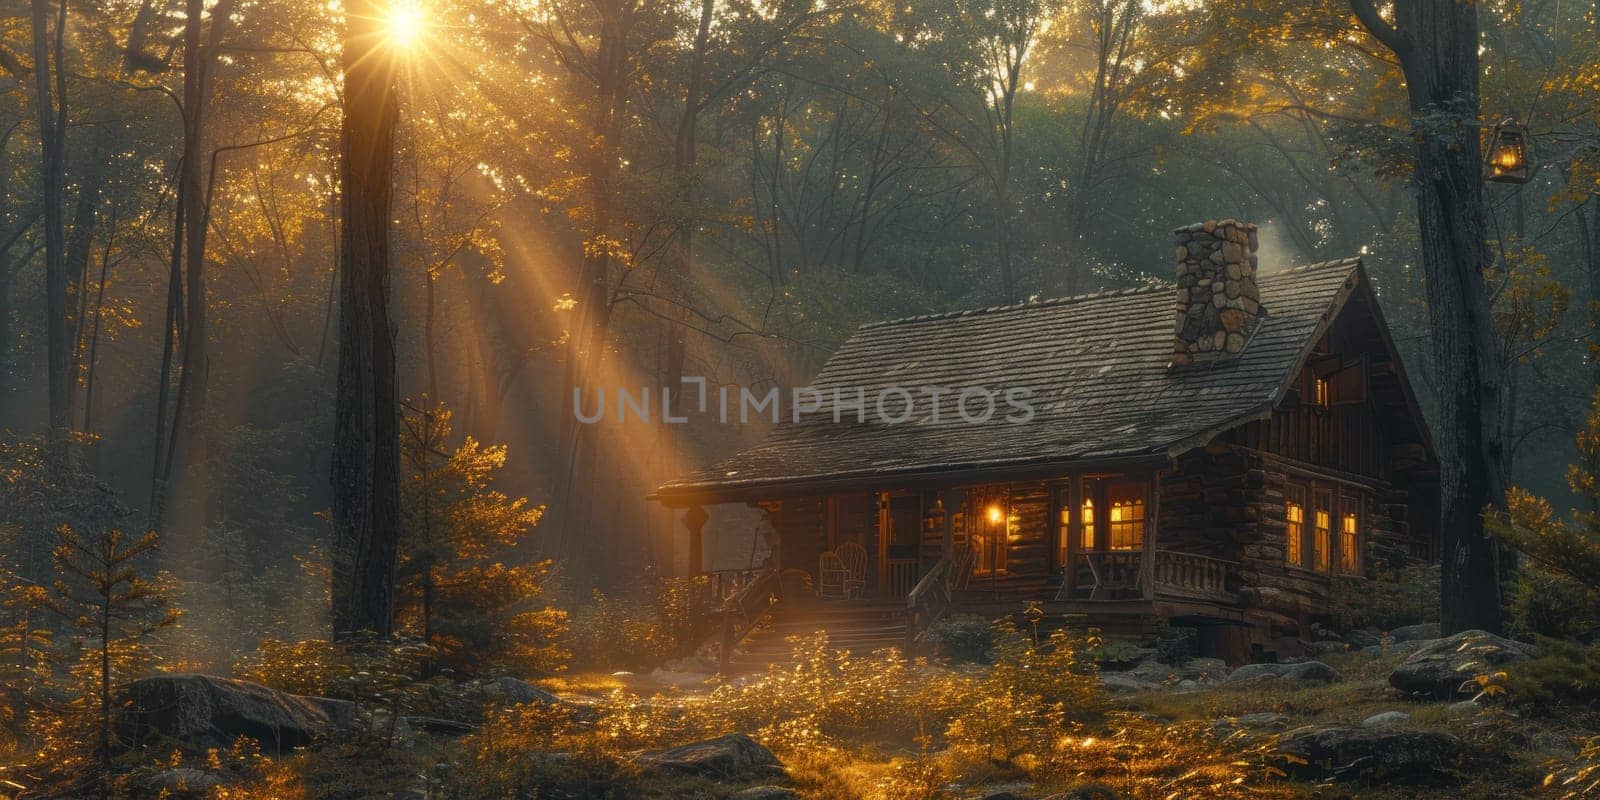 A cabin surrounded by trees with sunlight streaming through the branches, creating a serene woodland scene.